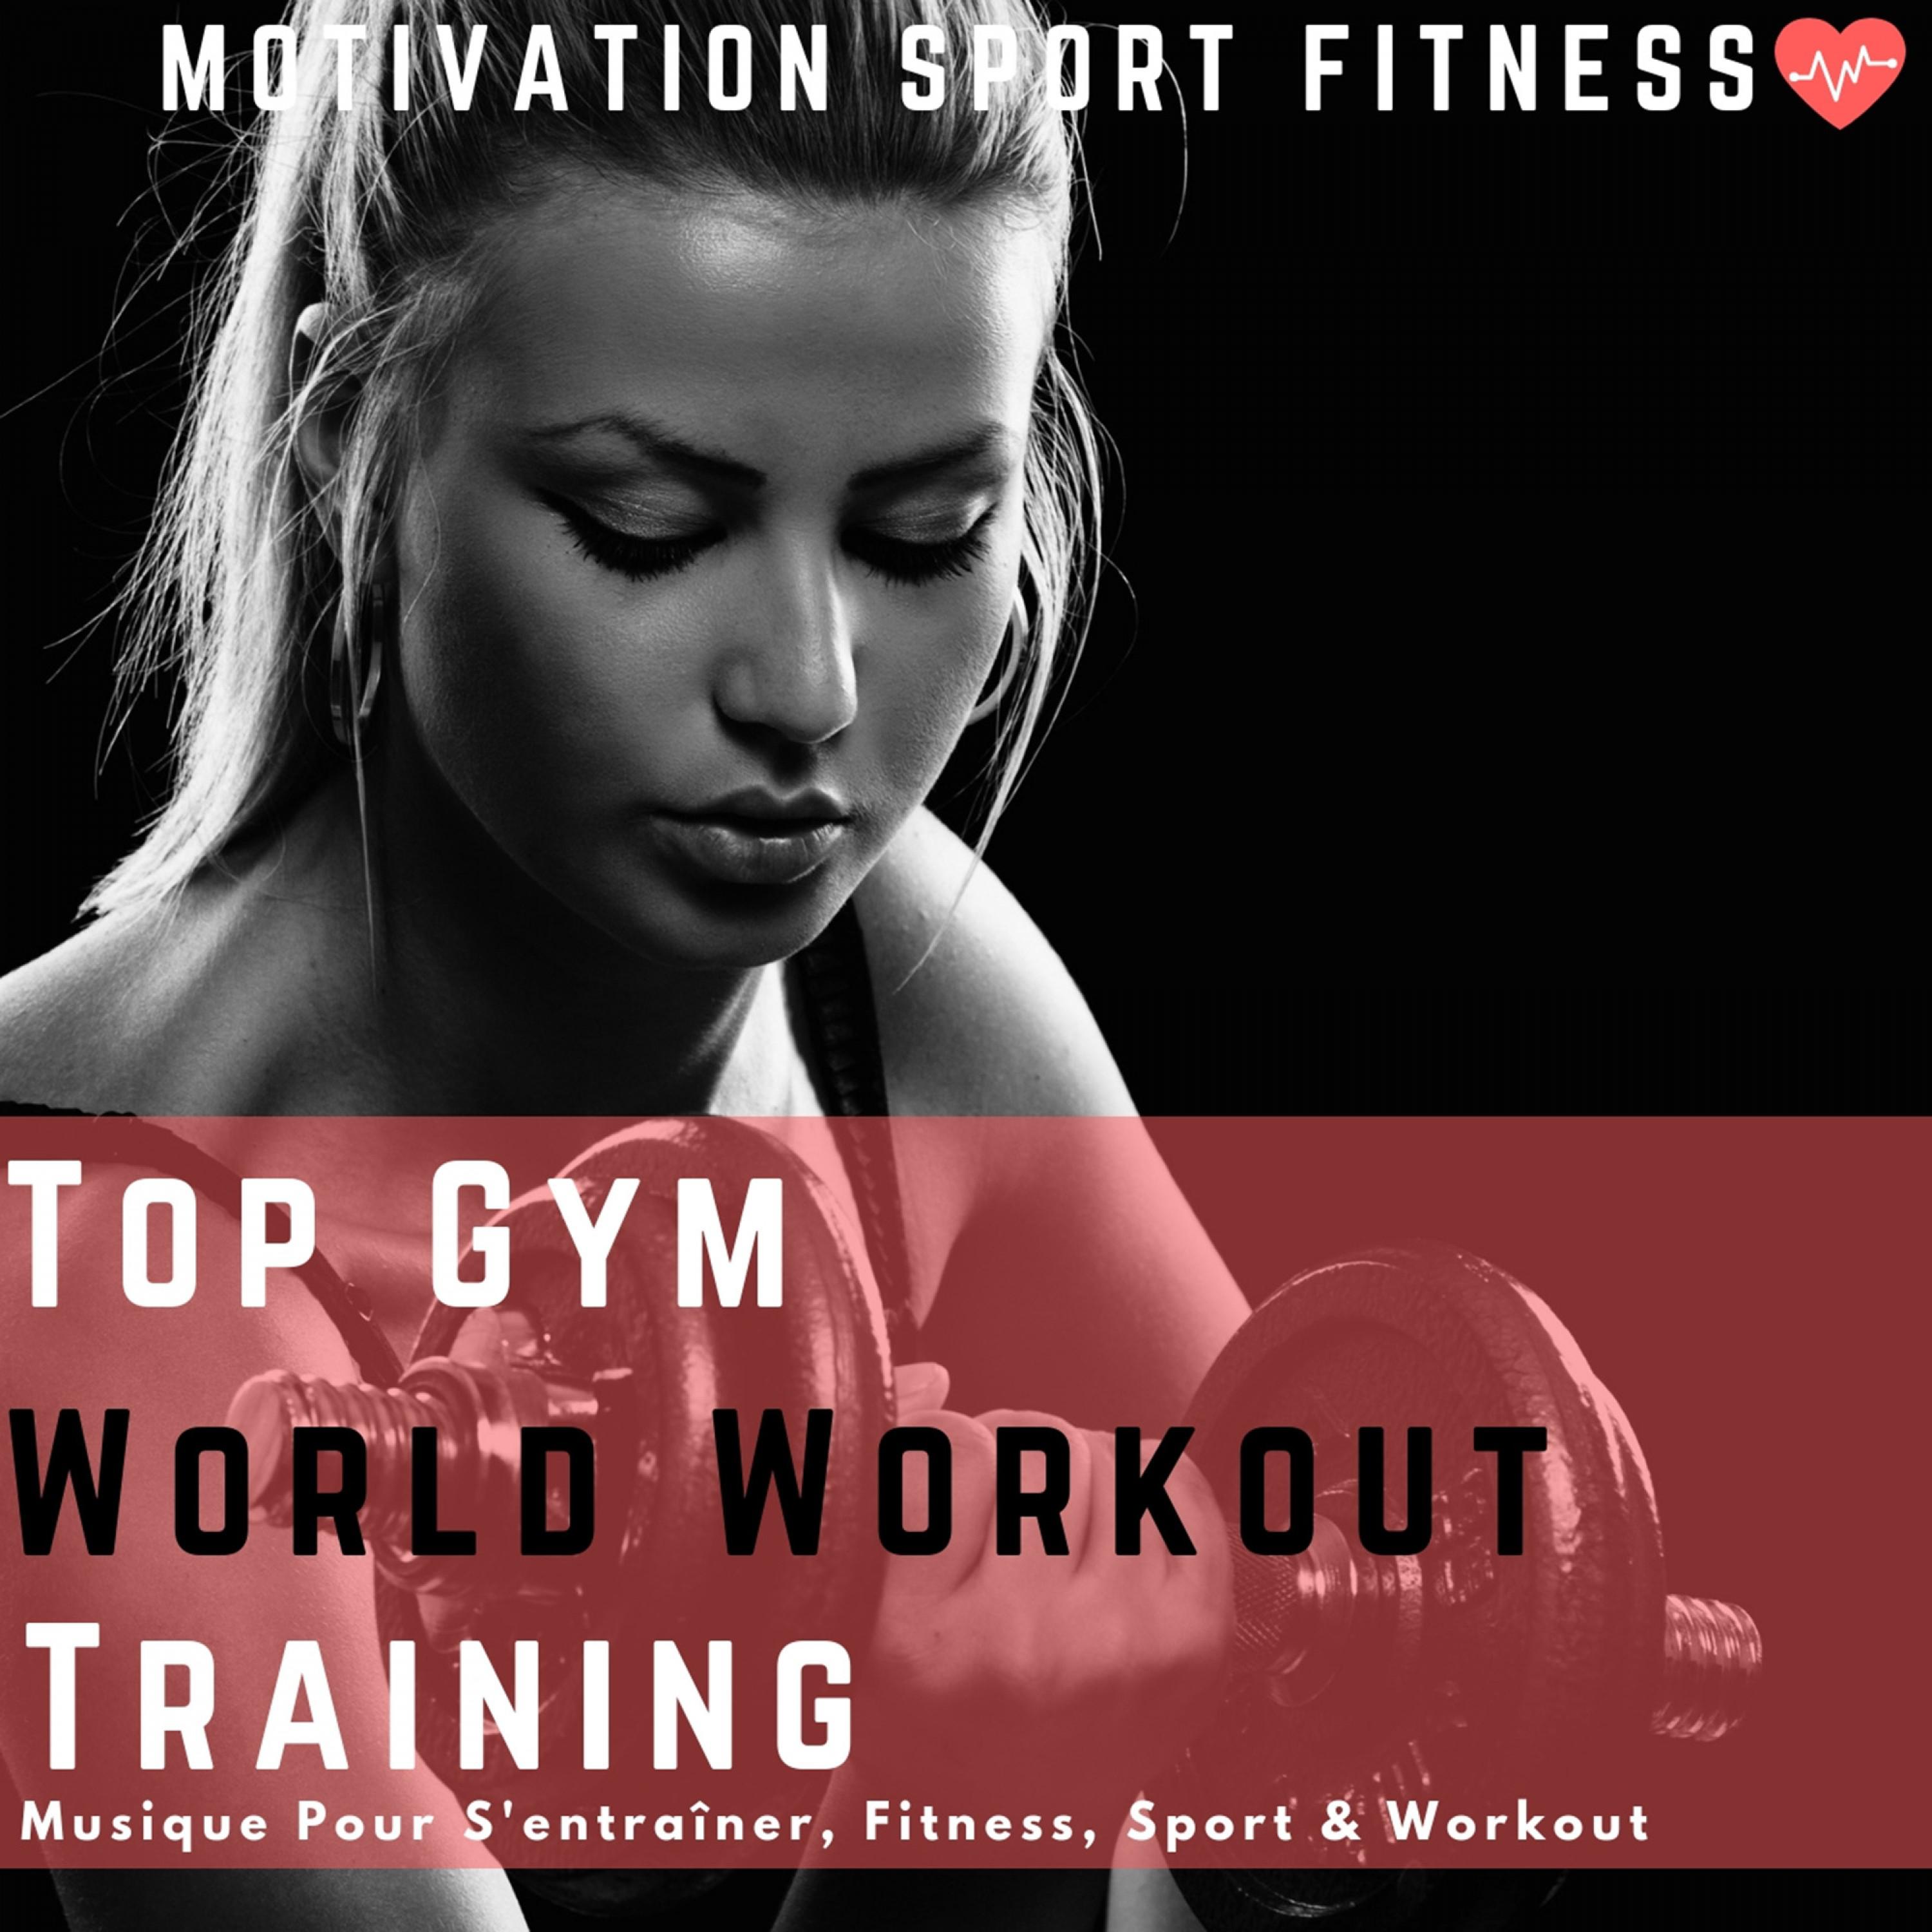 Top Gym World Workout Training